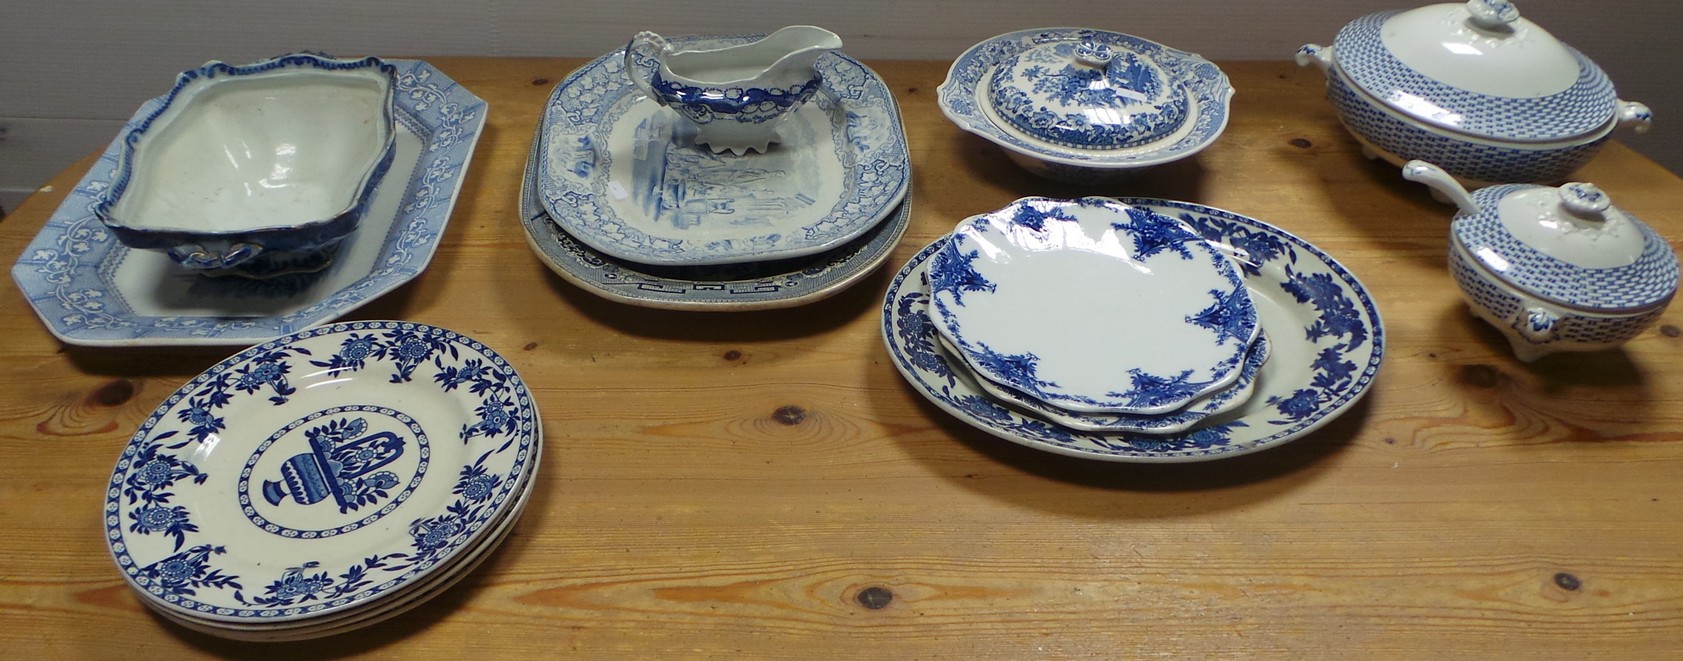 Quantity of Blue and White Delph including tureens "Basket" Soho Pottery limited, Meat Dishes etc.